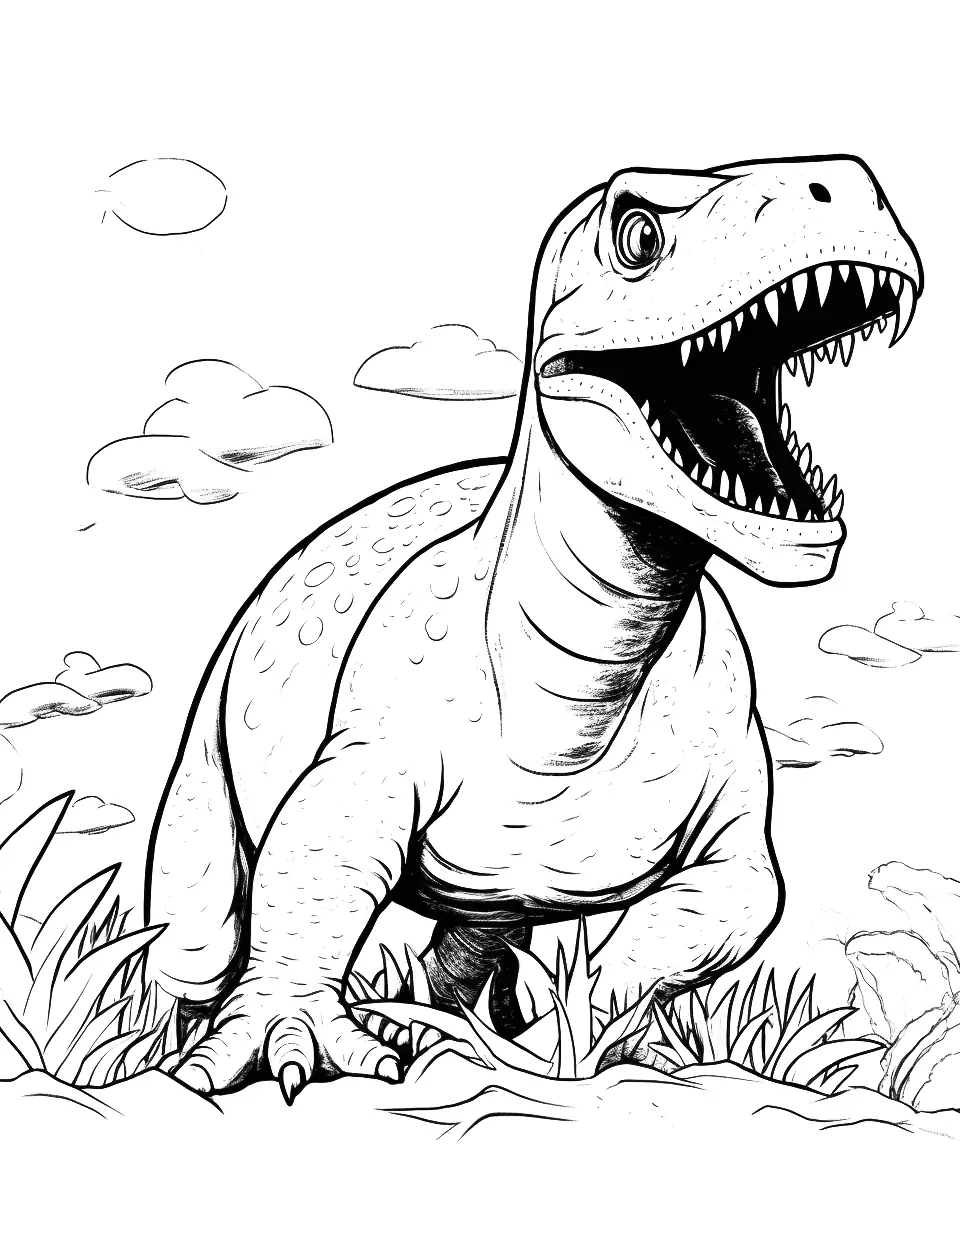 Indoraptor Chase Coloring Page - The Indoraptor chasing the heroes in a thrilling scene.